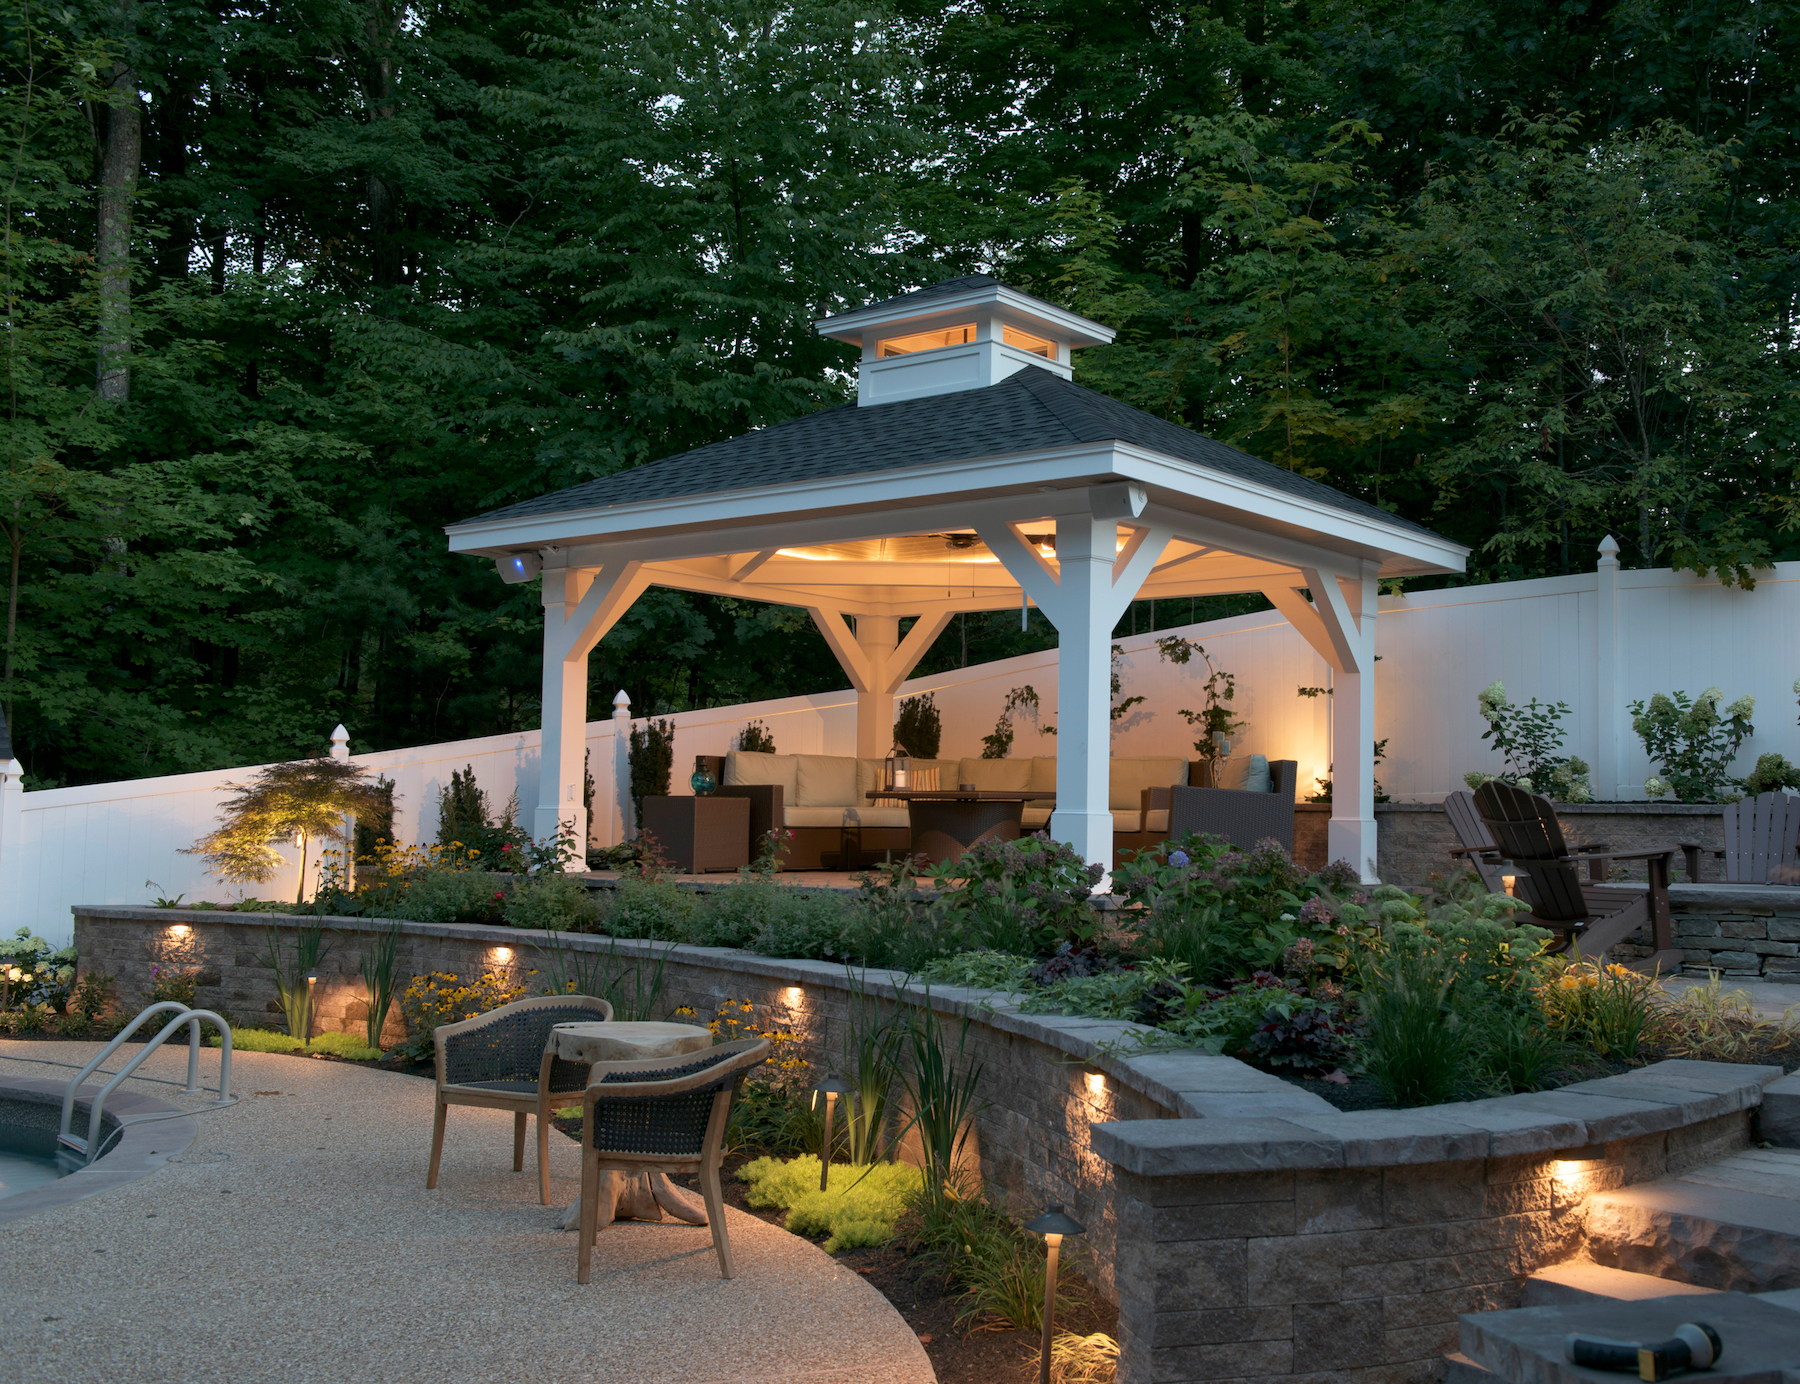 Warm lighting, ample seating, and a covered area made with Kleer trim and column wraps help make this outdoor space inviting .